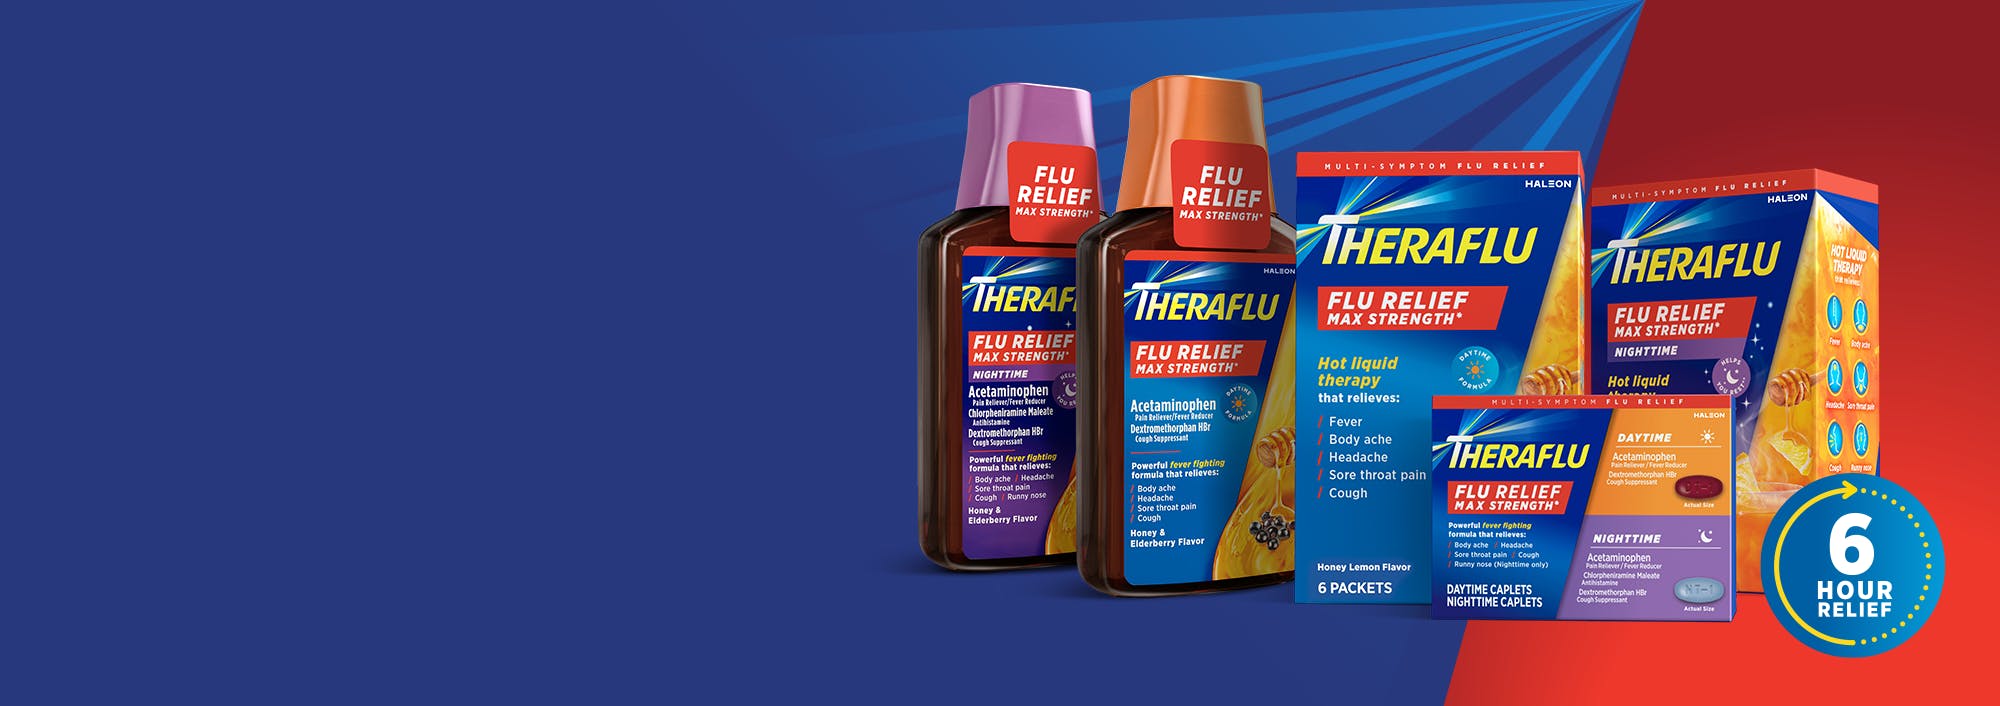 Theraflu products against a blue background